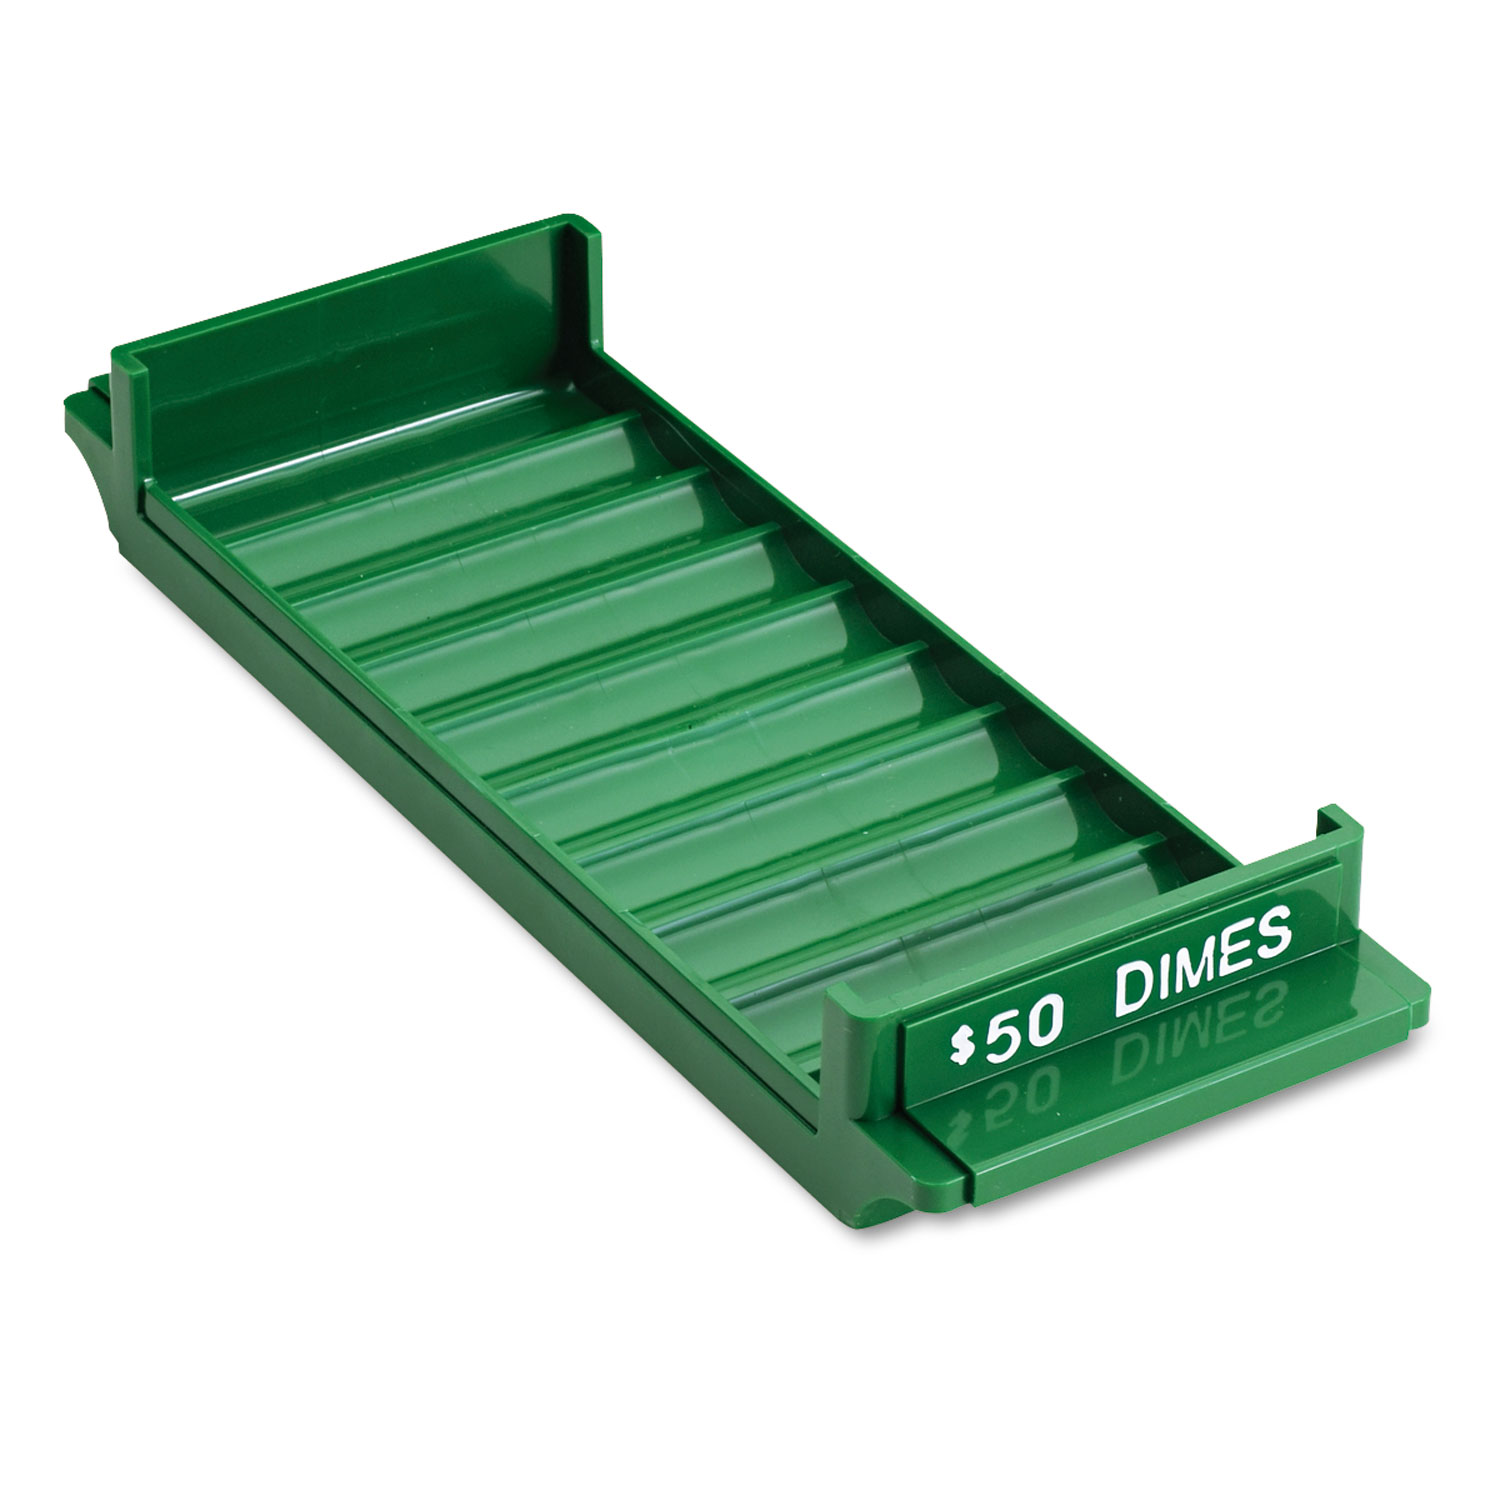  MMF Industries 212081002 Porta-Count System Rolled Coin Plastic Storage Tray, Green (MMF212081002) 